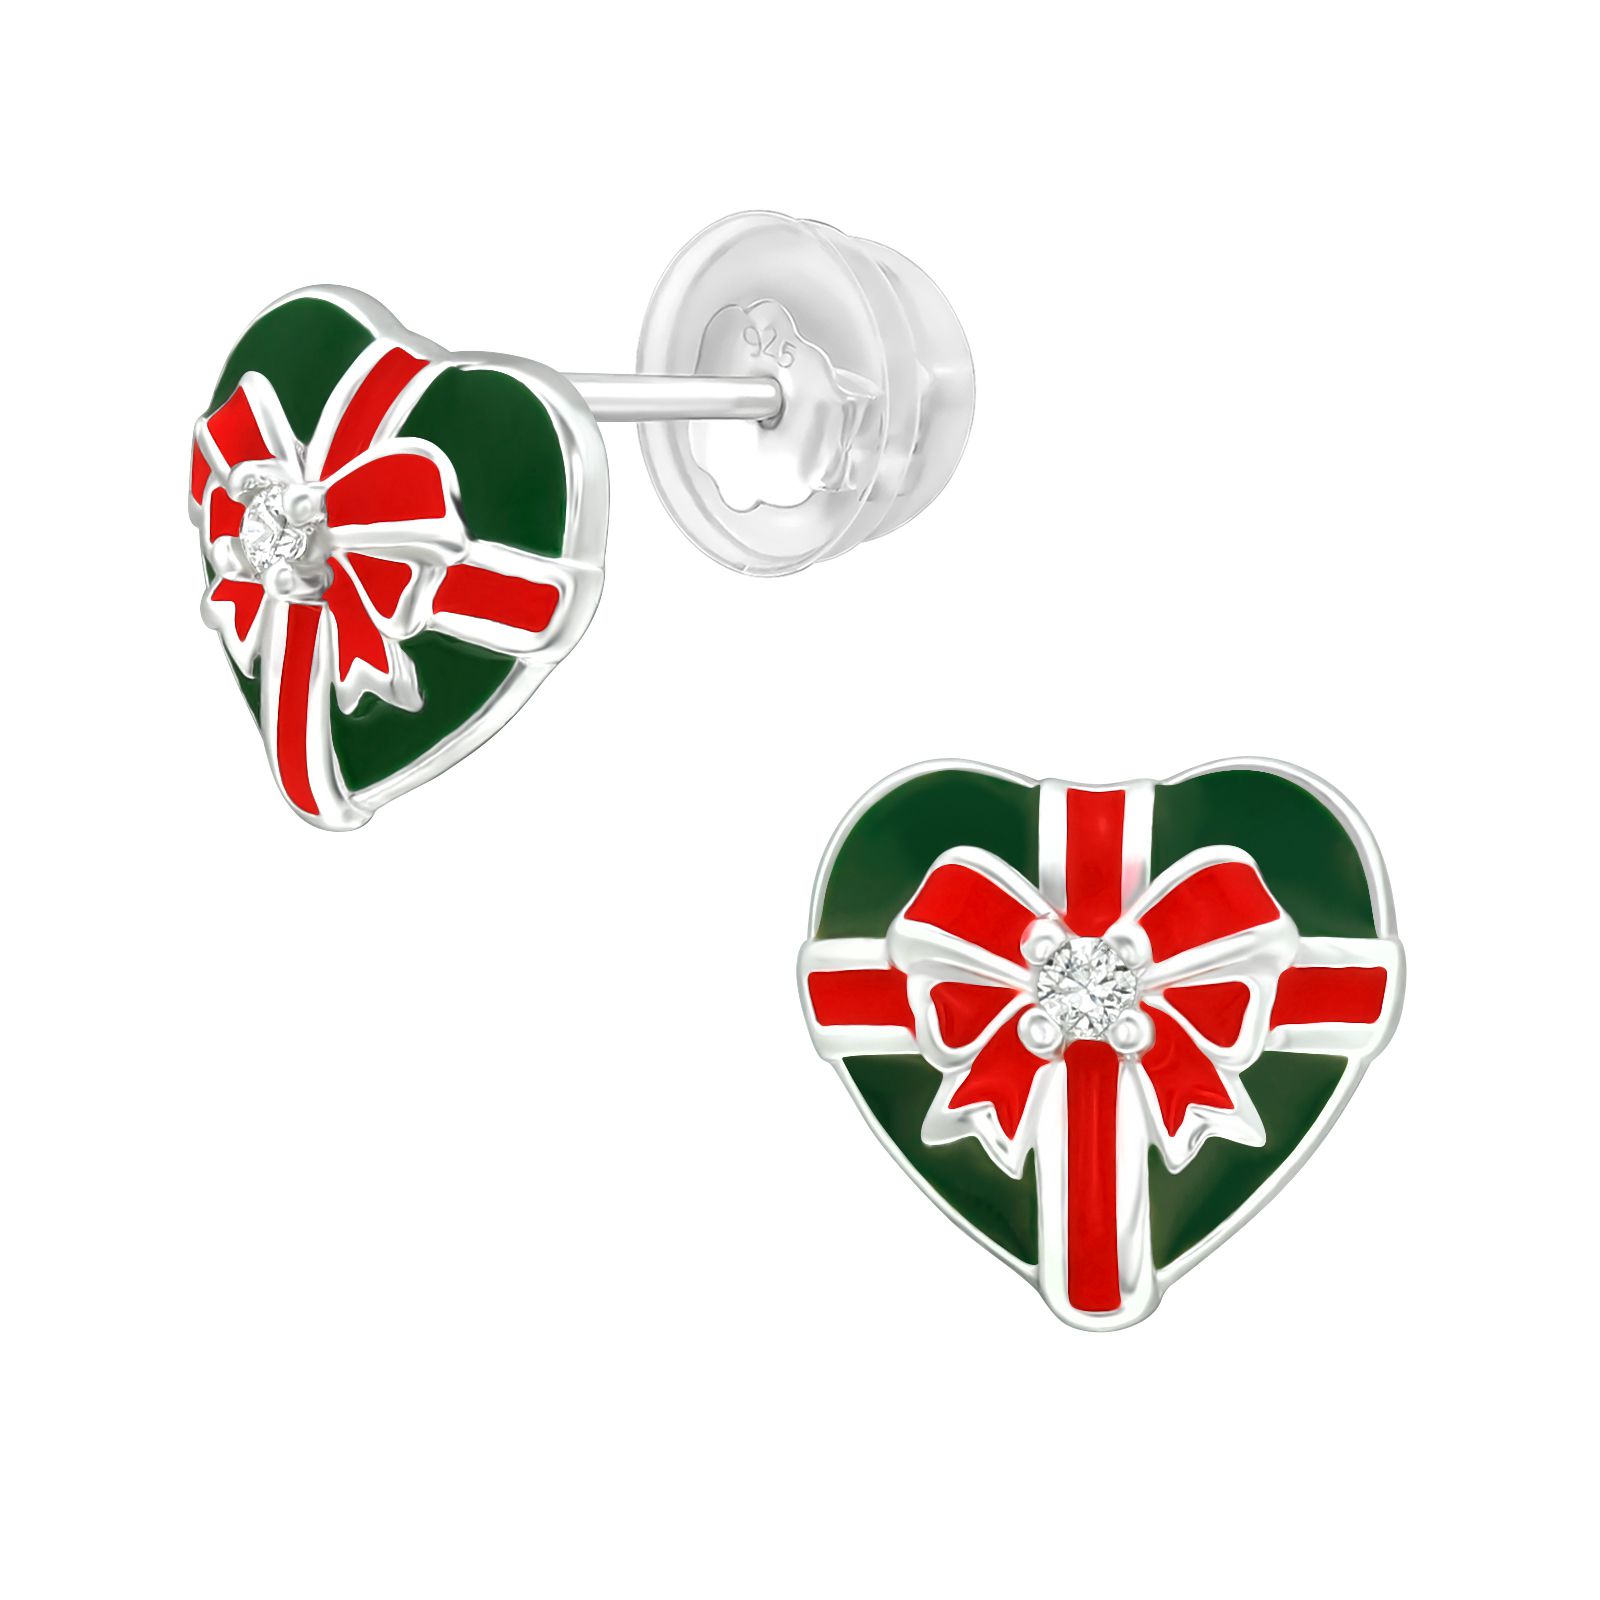 Premium Children's Silver Christmas Present Ear Studs with Cubic Zirconia